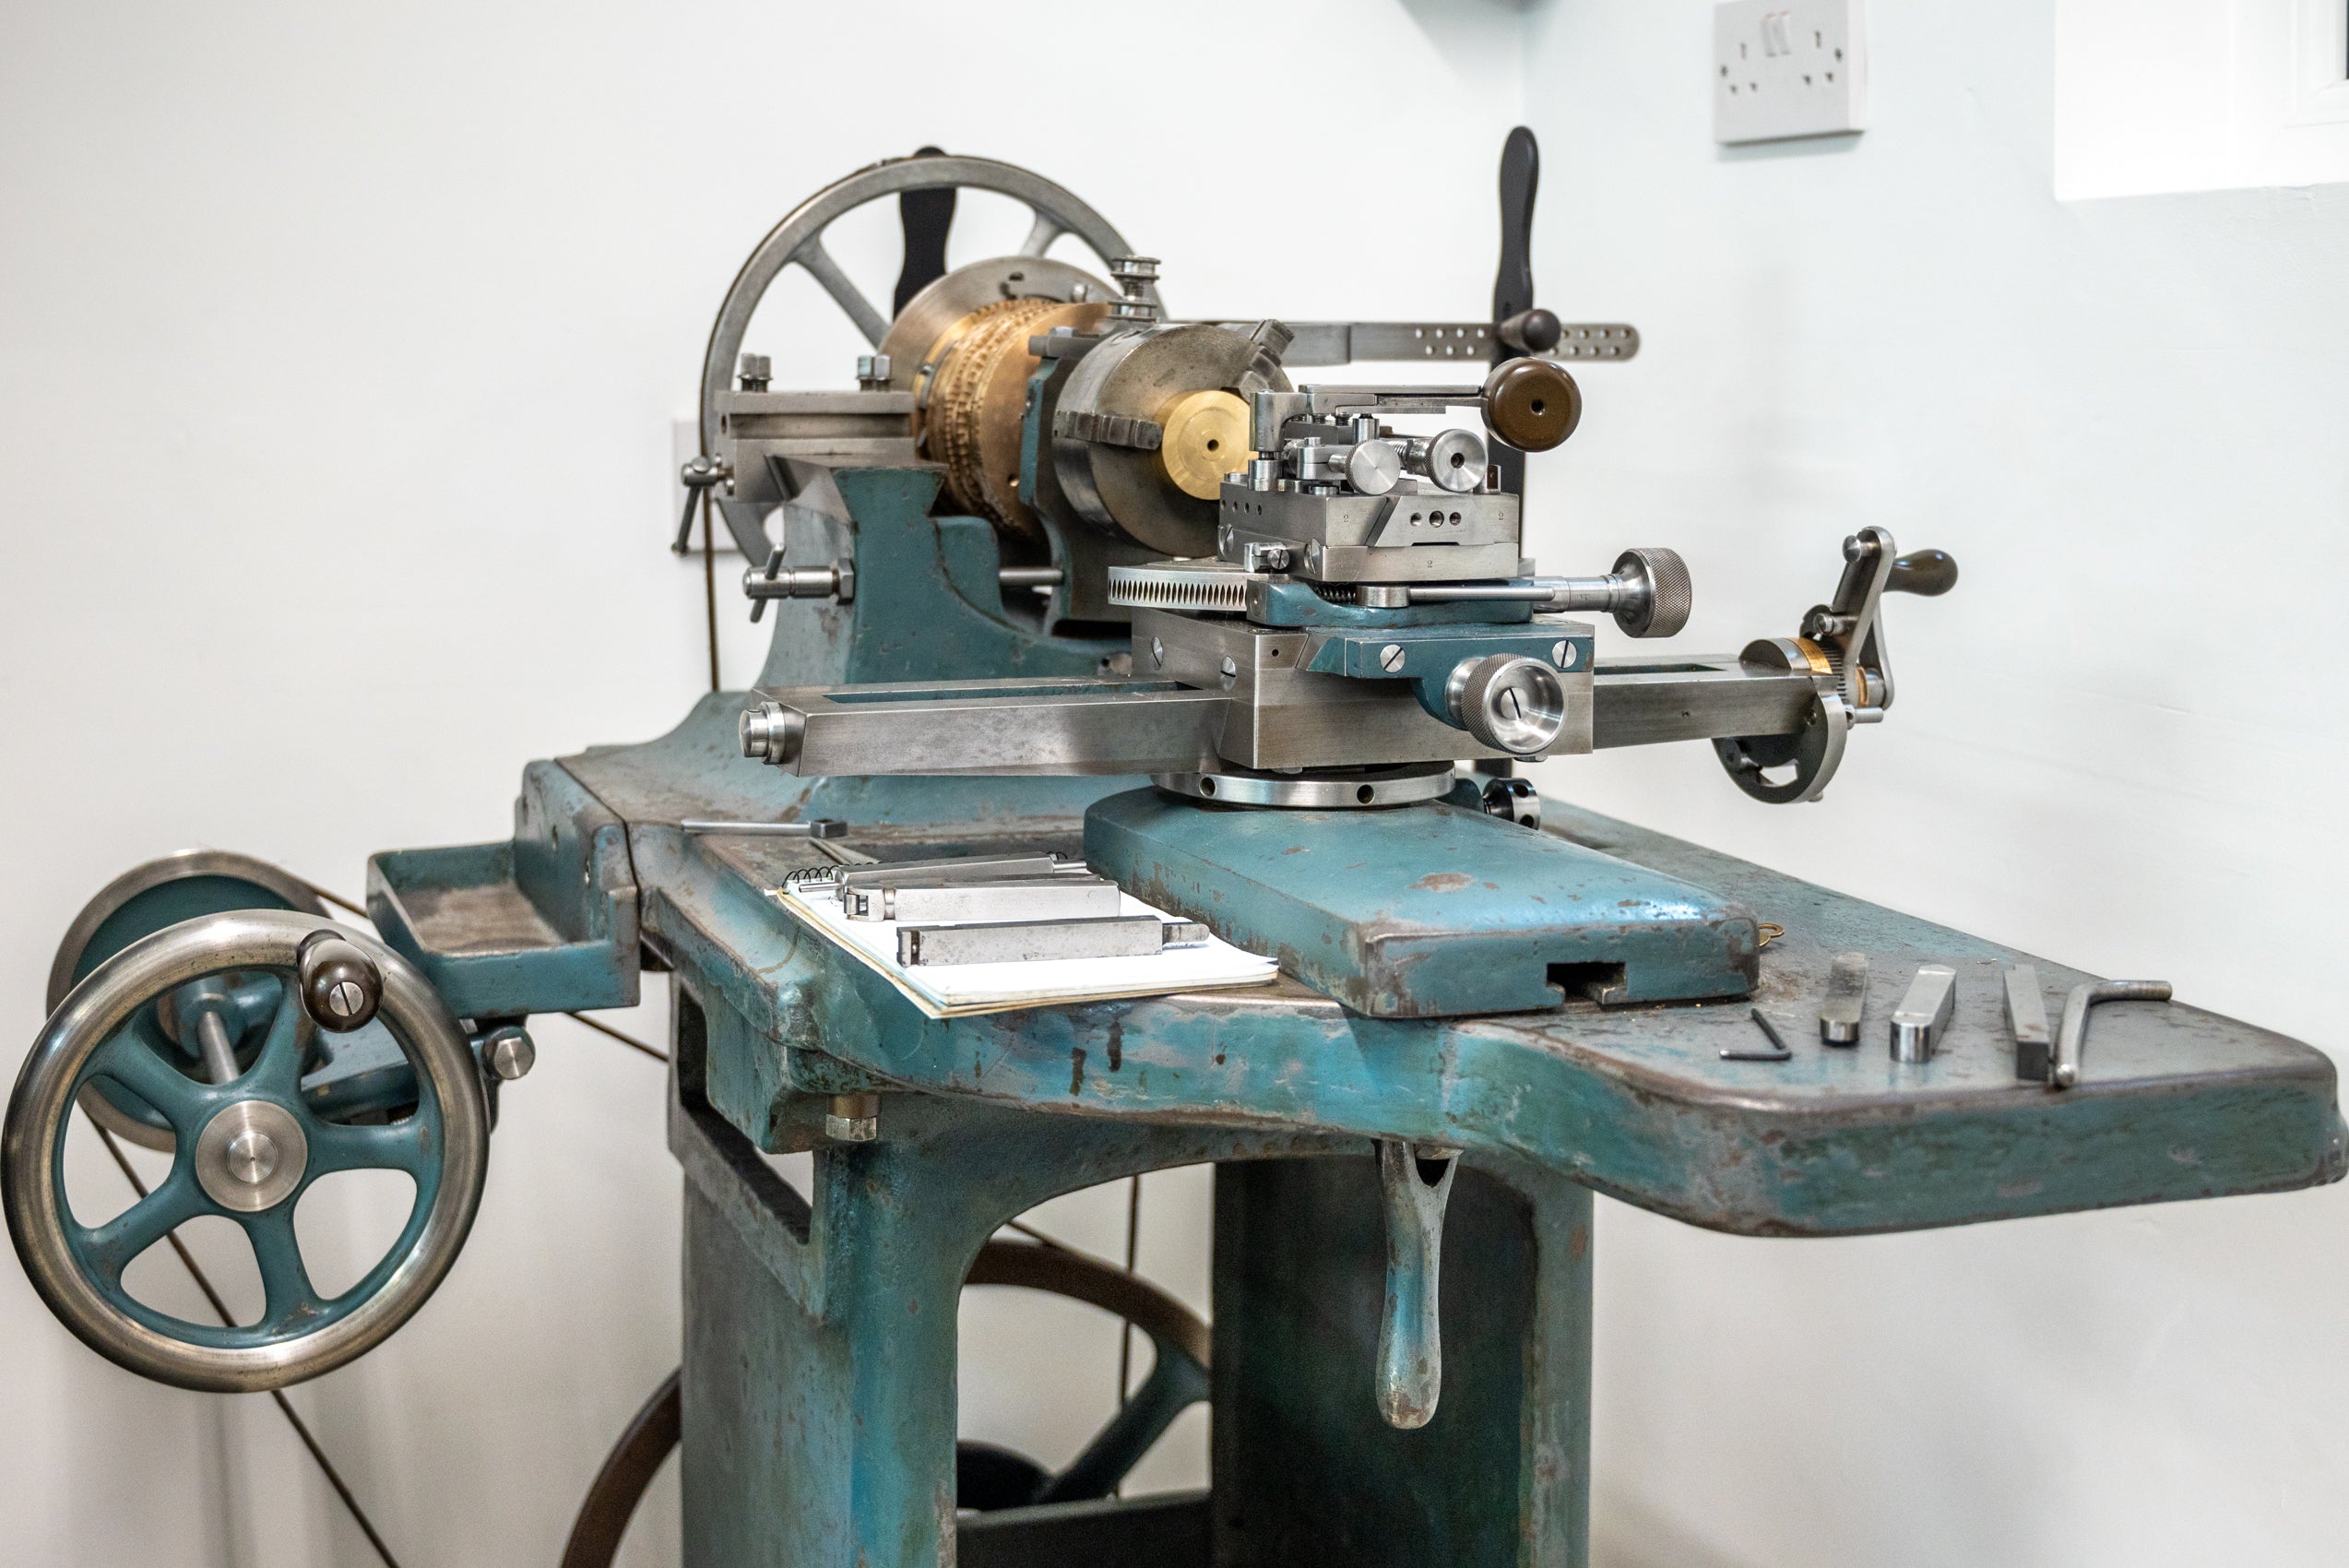 Historic rose engine lathe used for creating engine turned guilloche patterns on watch dials